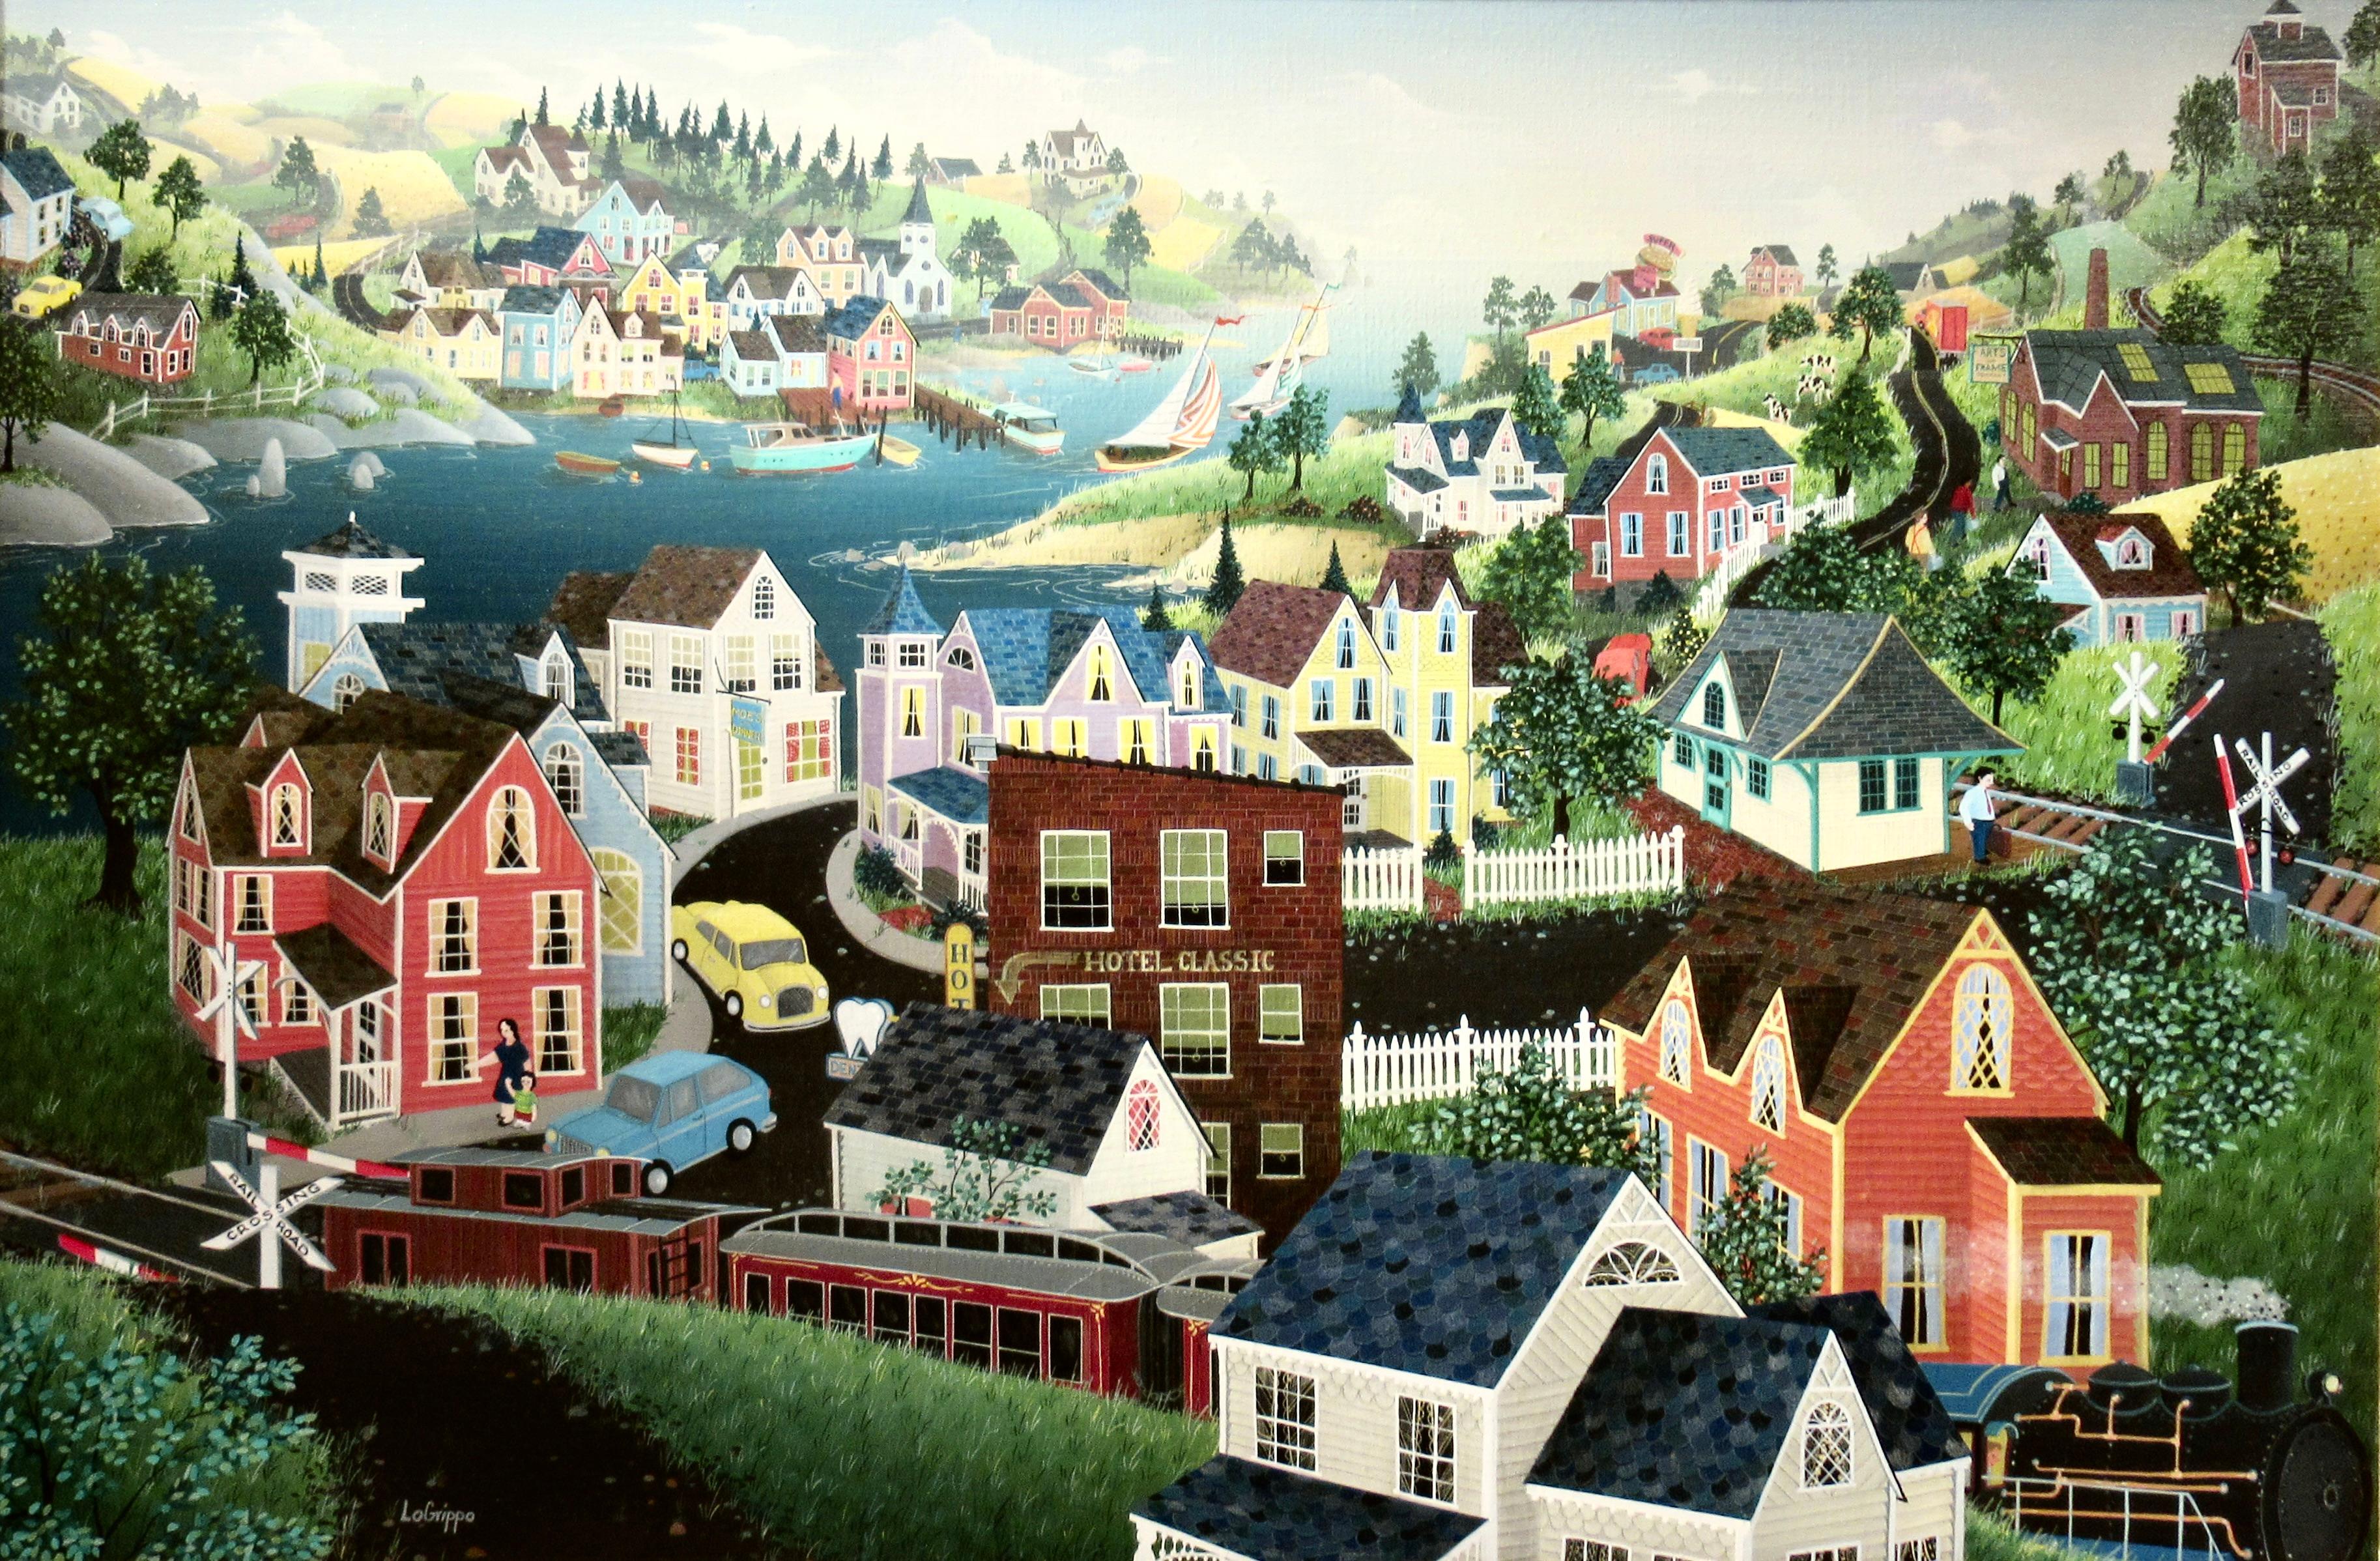 The harbor - Painting by Robert Logrippo